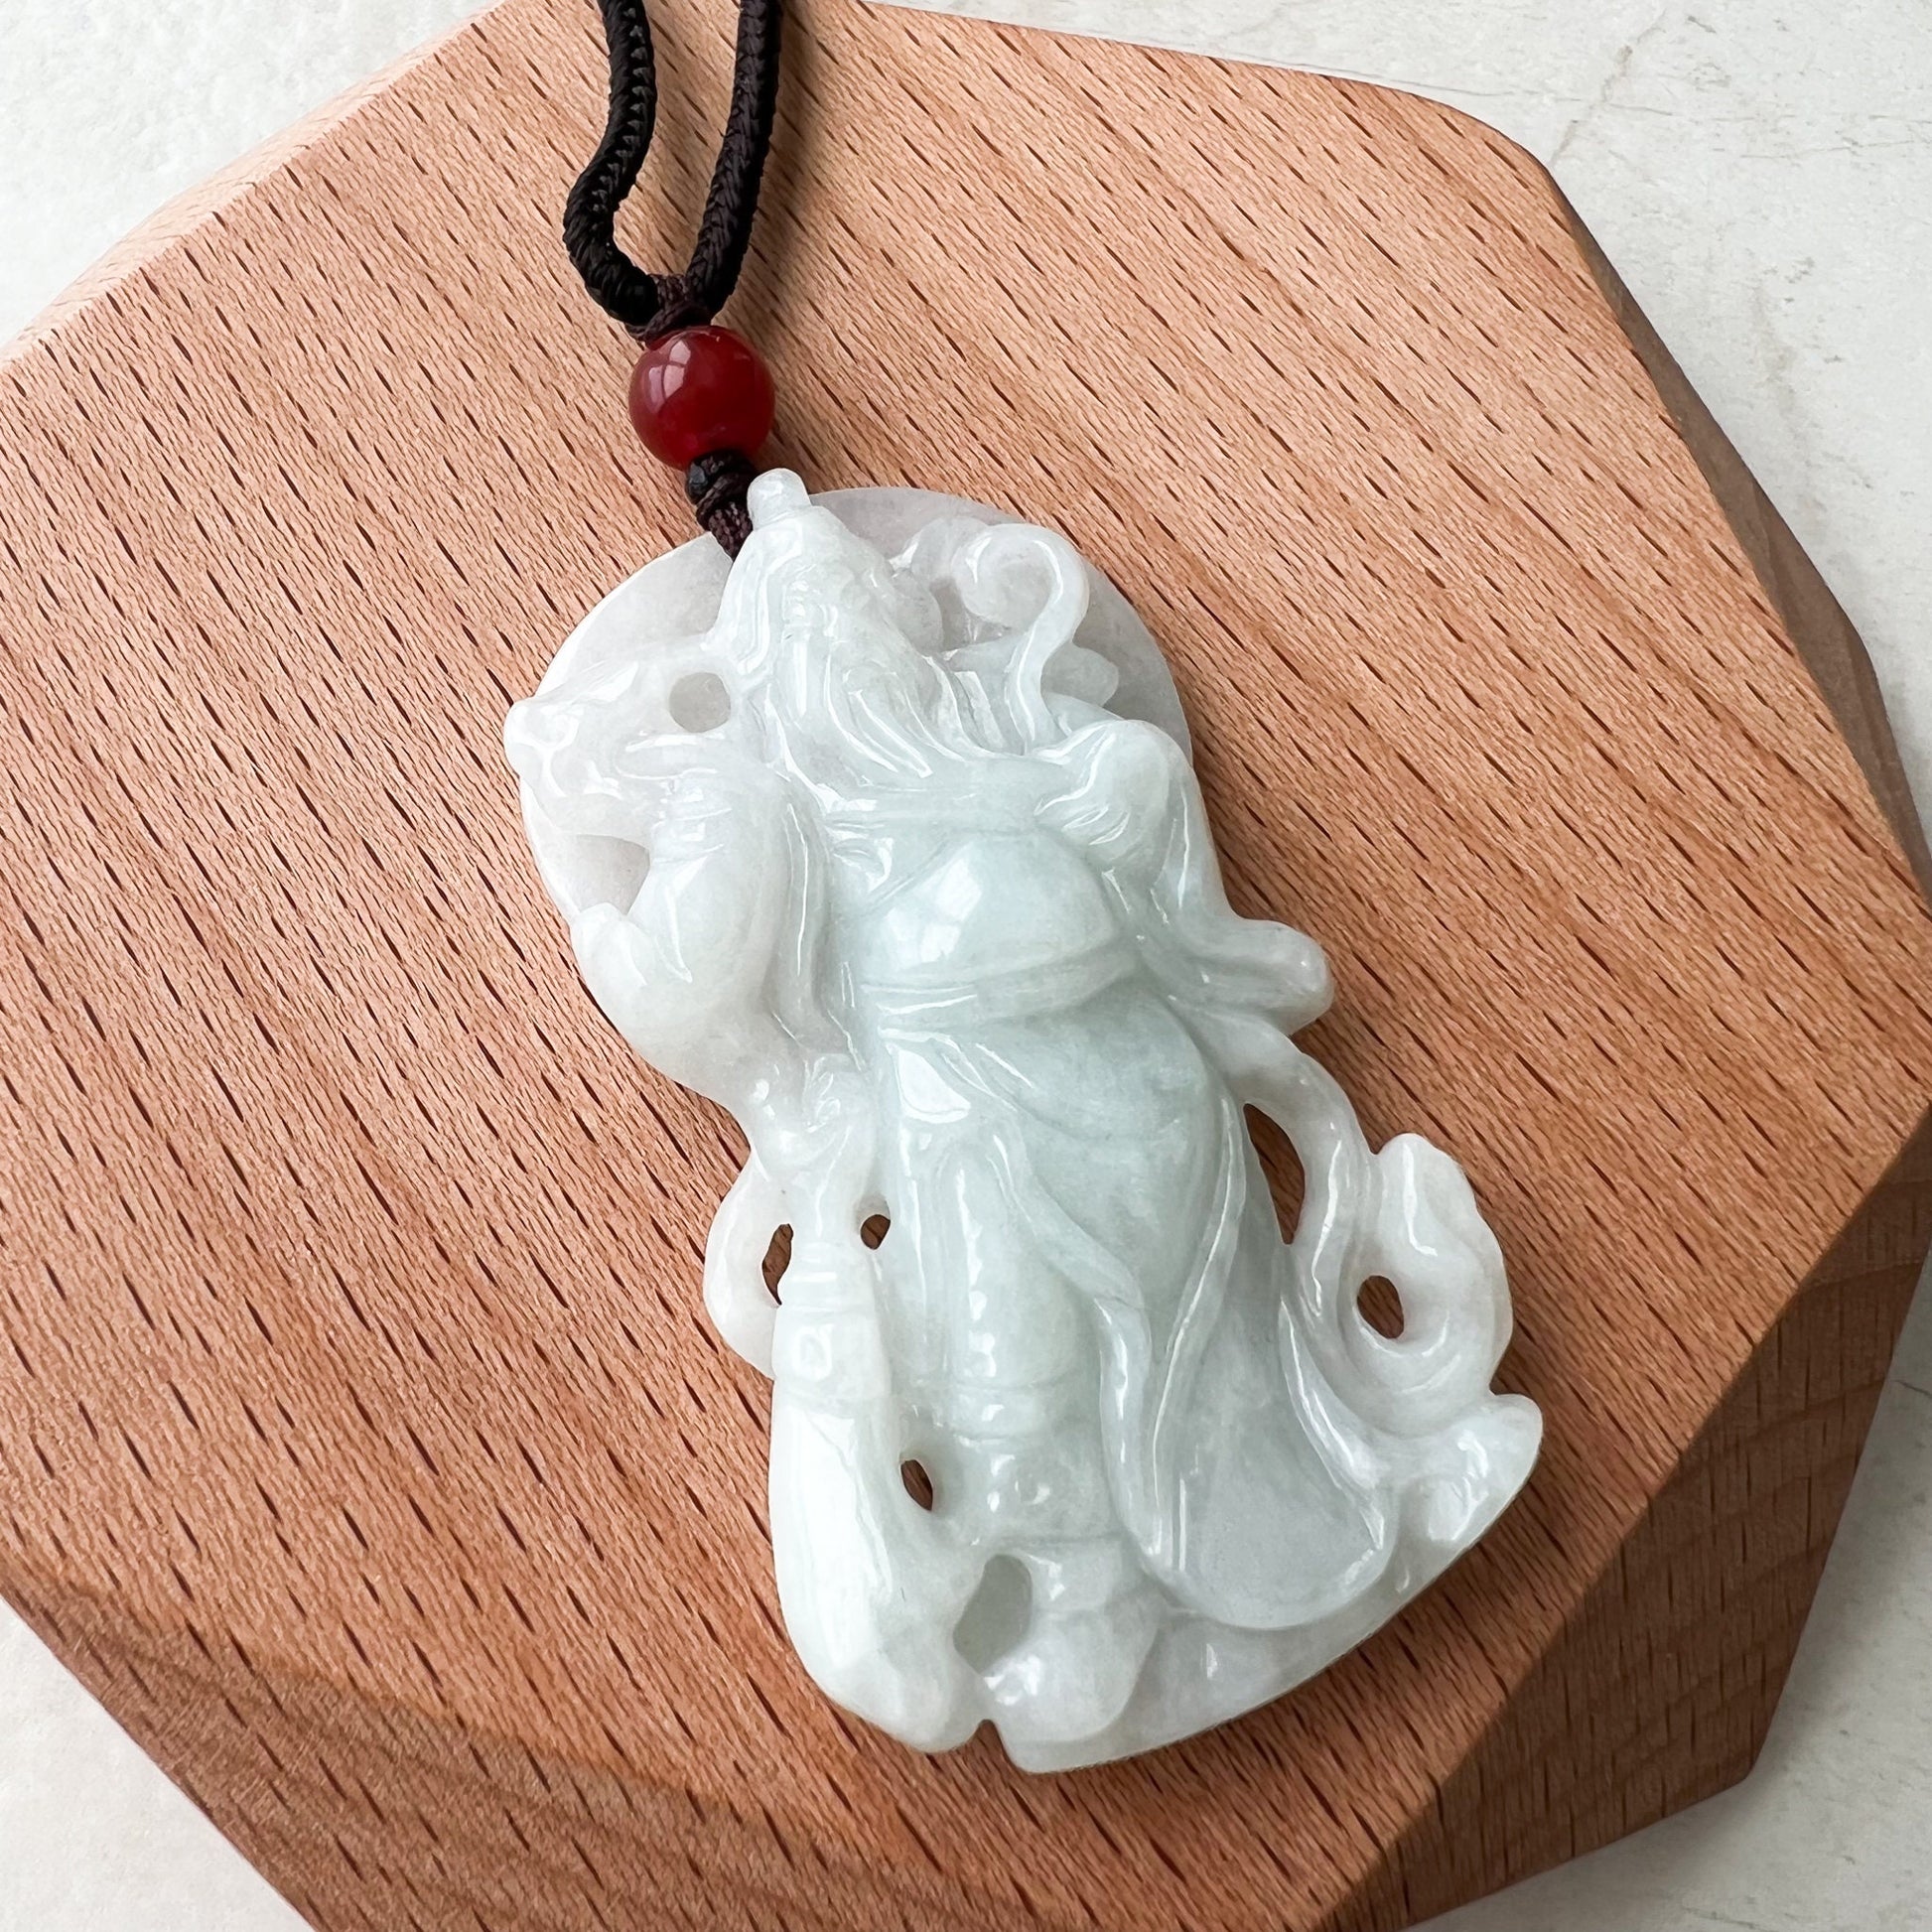 RESERVED FOR J White Jadeite Jade Guan Yu Guan Gong Carved Pendant Necklace, YJ-1221-0233722 - AriaDesignCollection